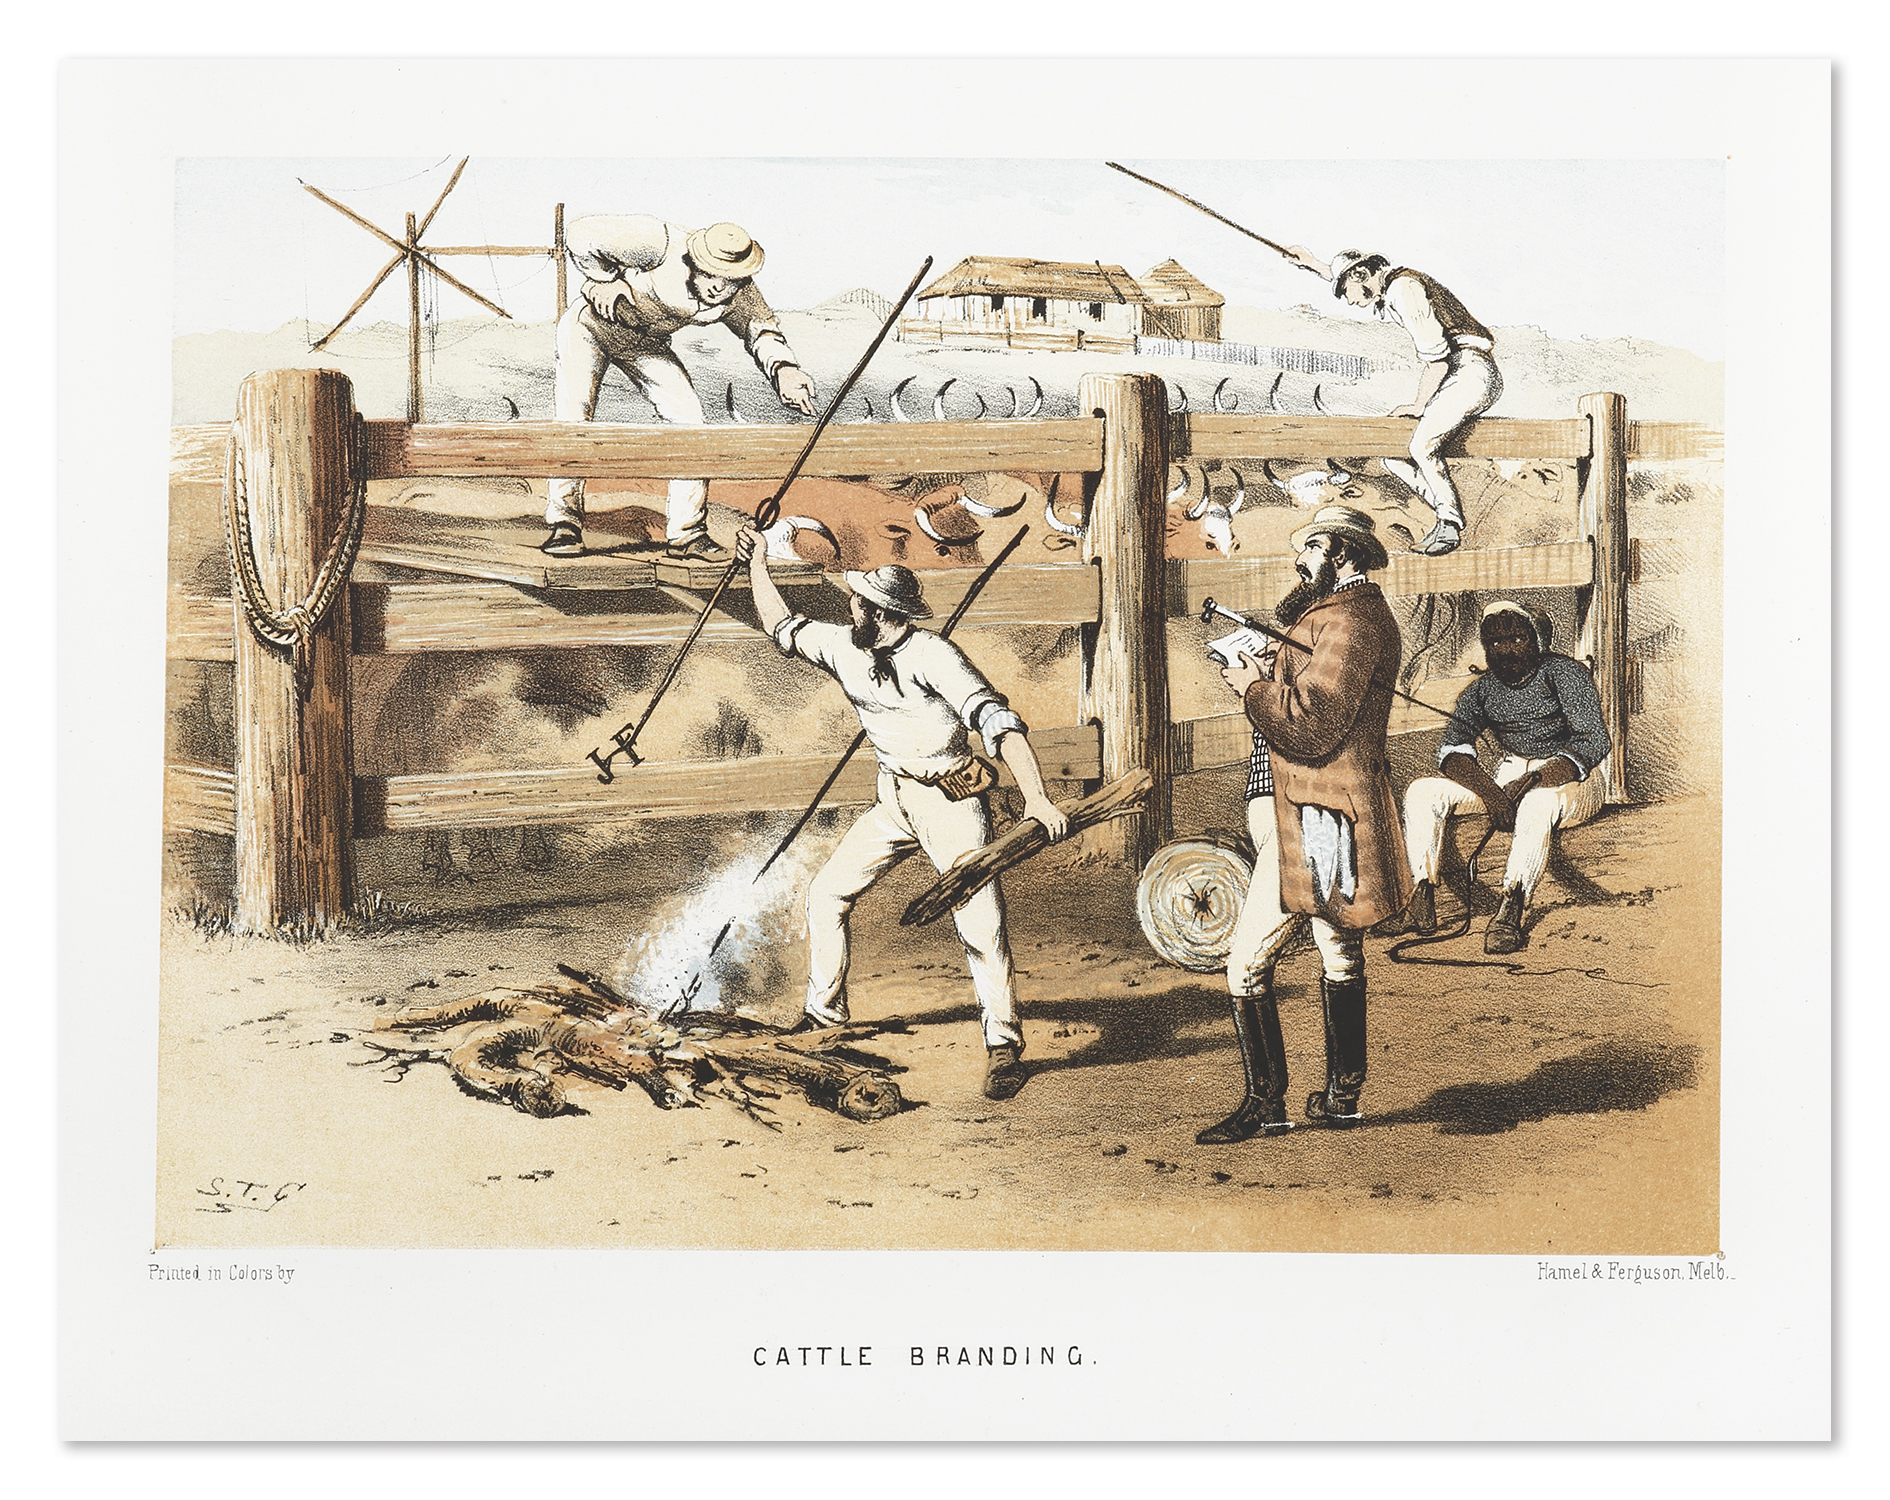 Cattle Branding - Antique Print from 1864